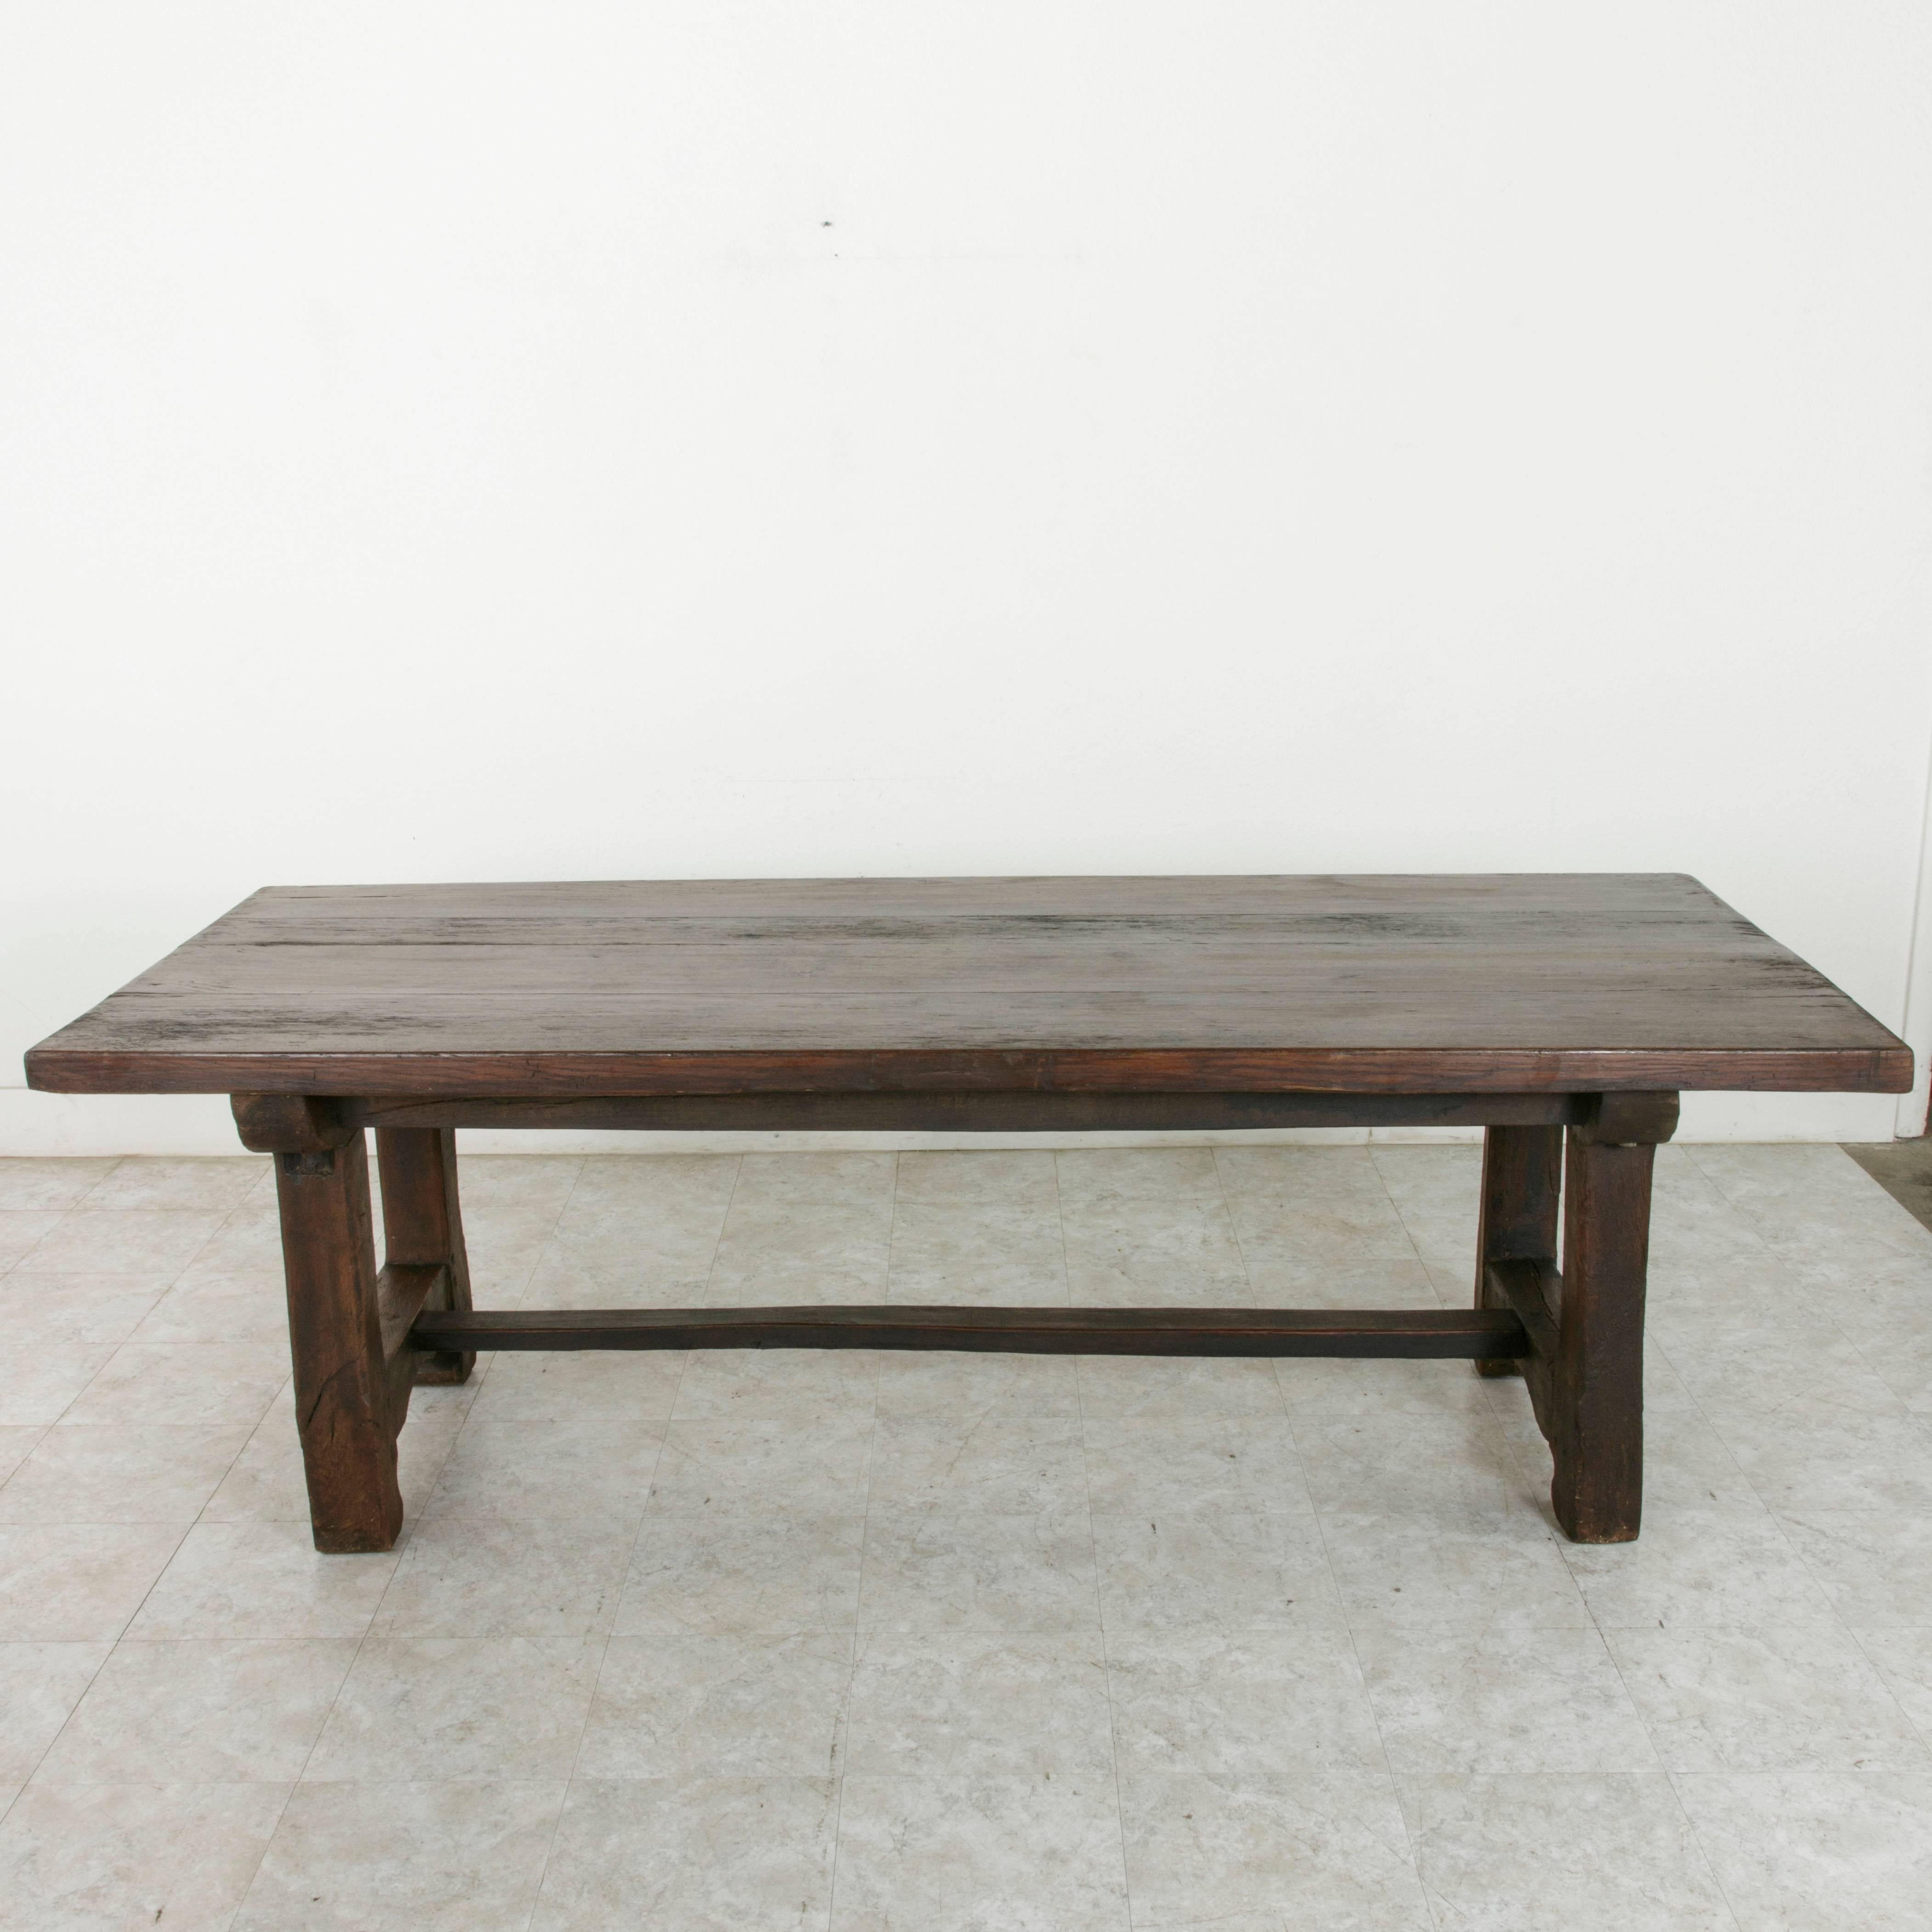 Created by 19th century artisans for a Normandy farm in France, this hand pegged oak trestle table was constructed using eighteenth century beams and mortise and tenon joinery. Its 2.25 inch thick top is formed by four planks of solid oak joined by